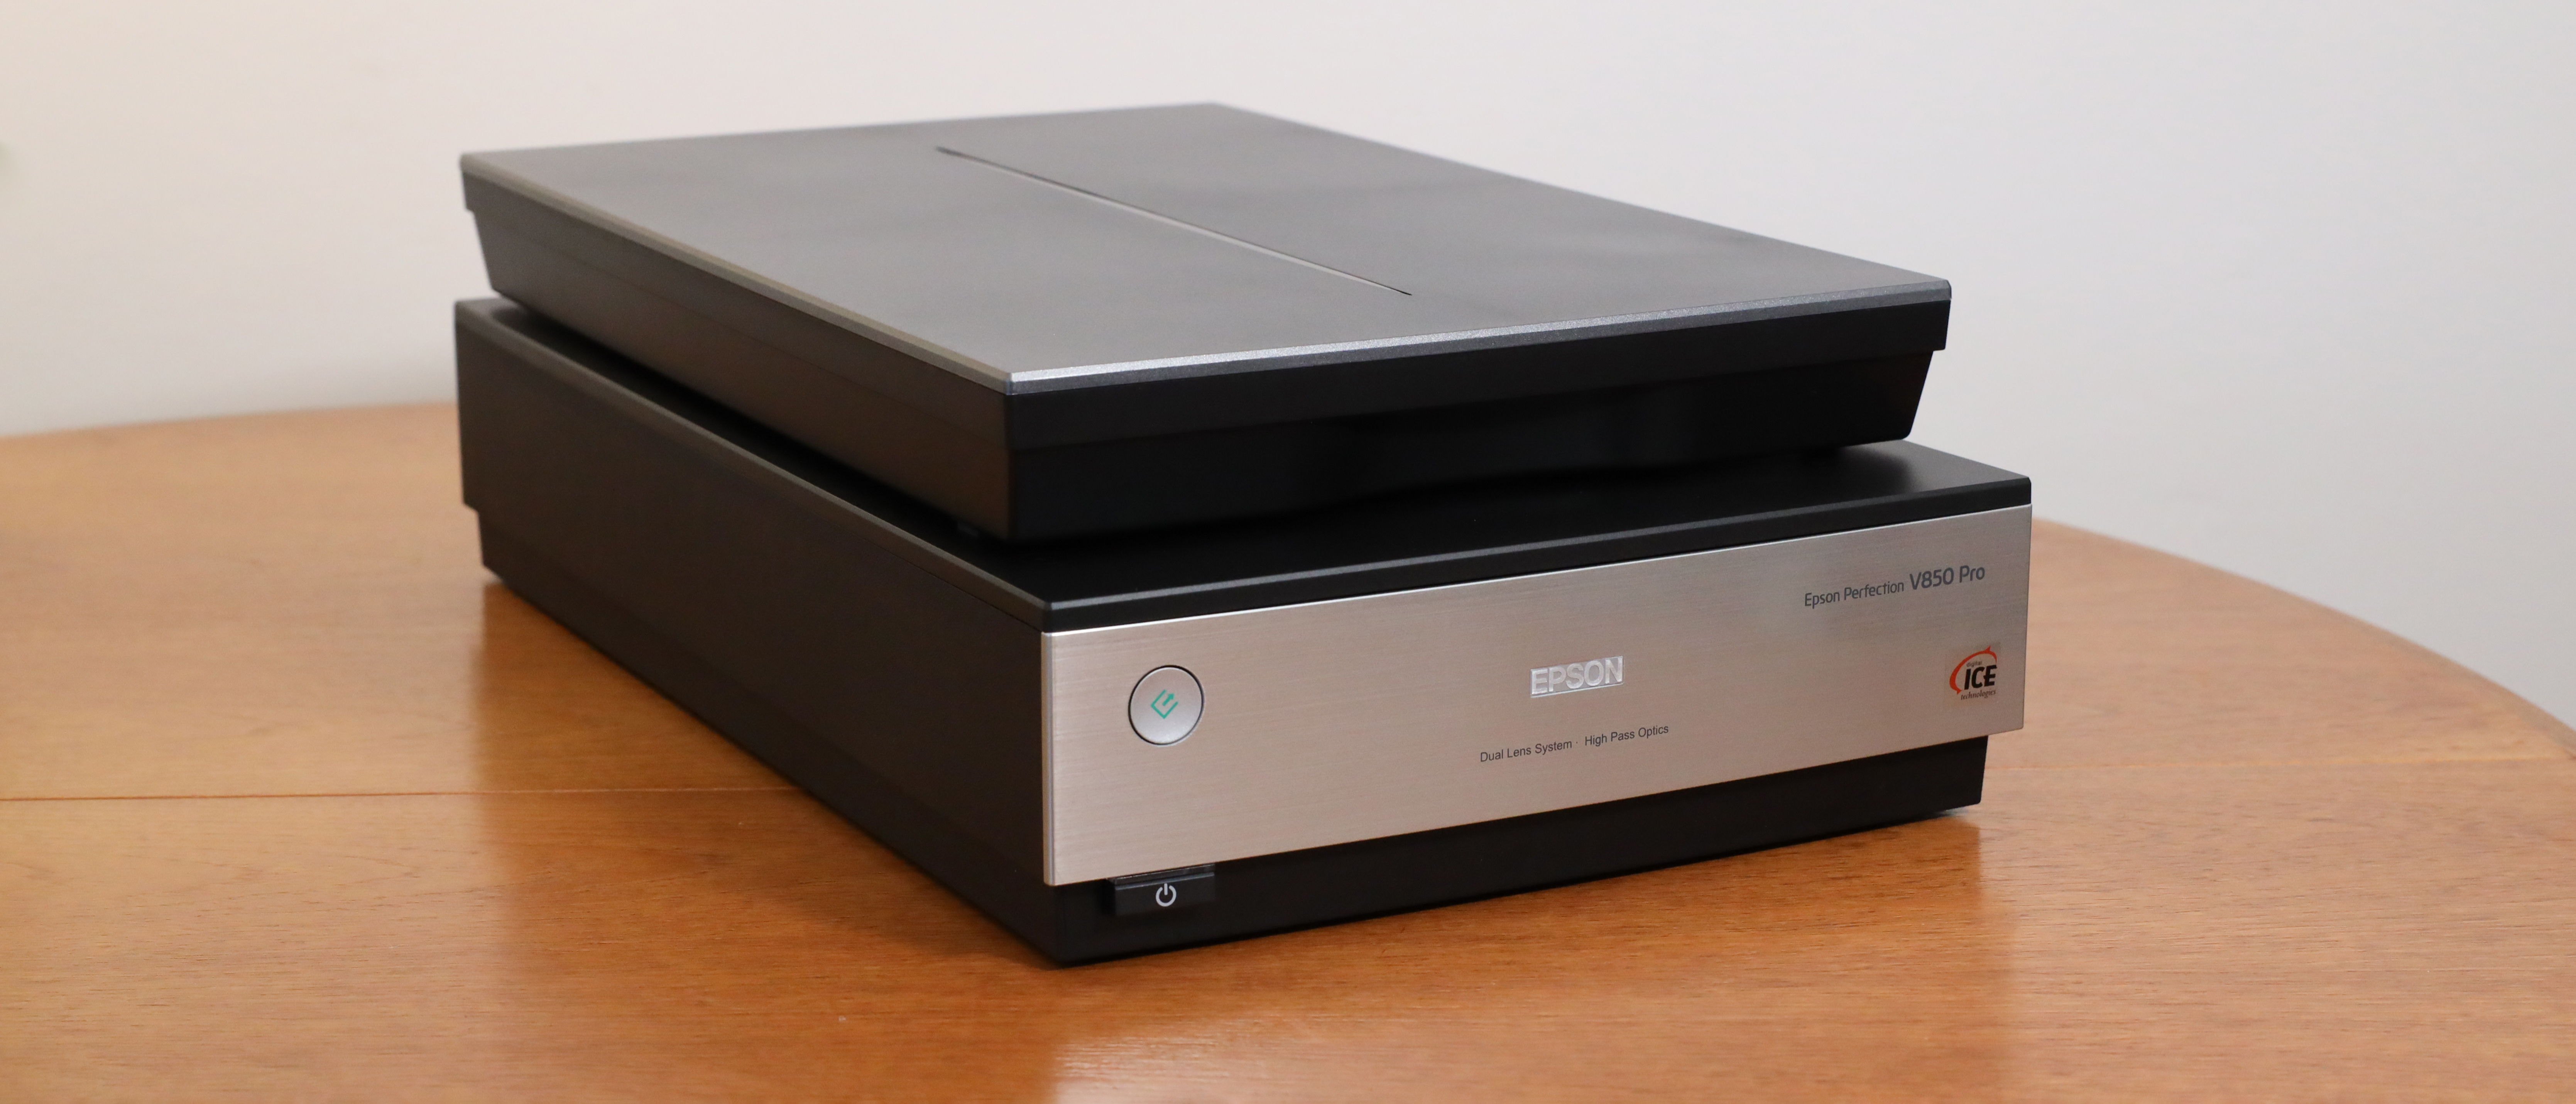 Epson Continues to Lead Photo Scanning Market with New High-Resolution  Scanners for Restoring, Archiving and Sharing